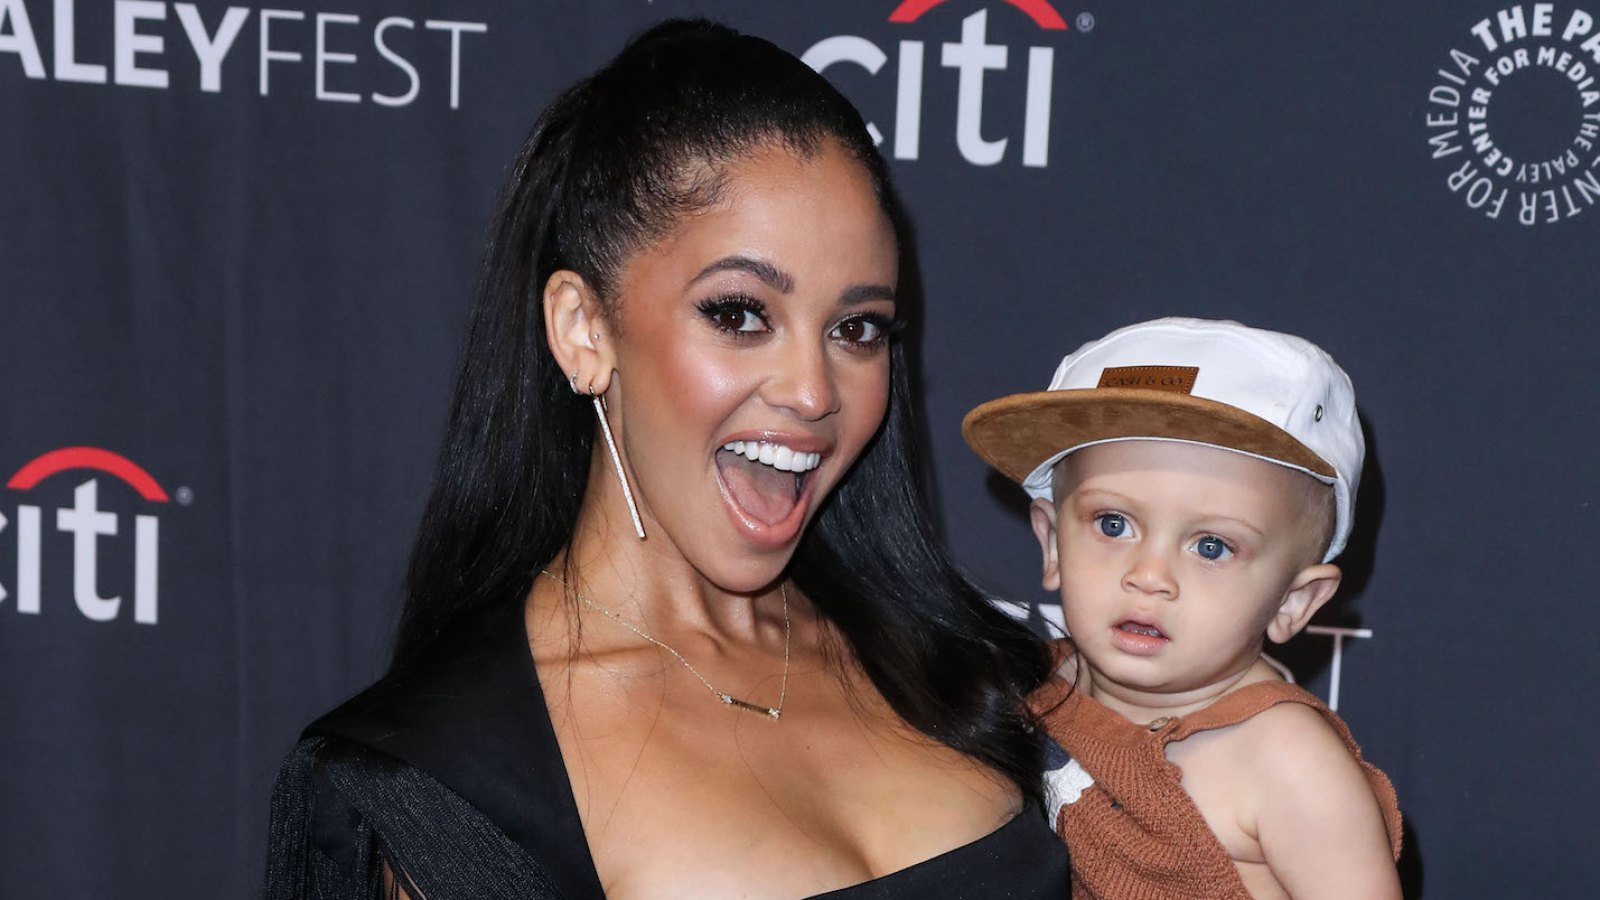 Riverdale's Vanessa Morgan Shows New BF Bonding With Son River